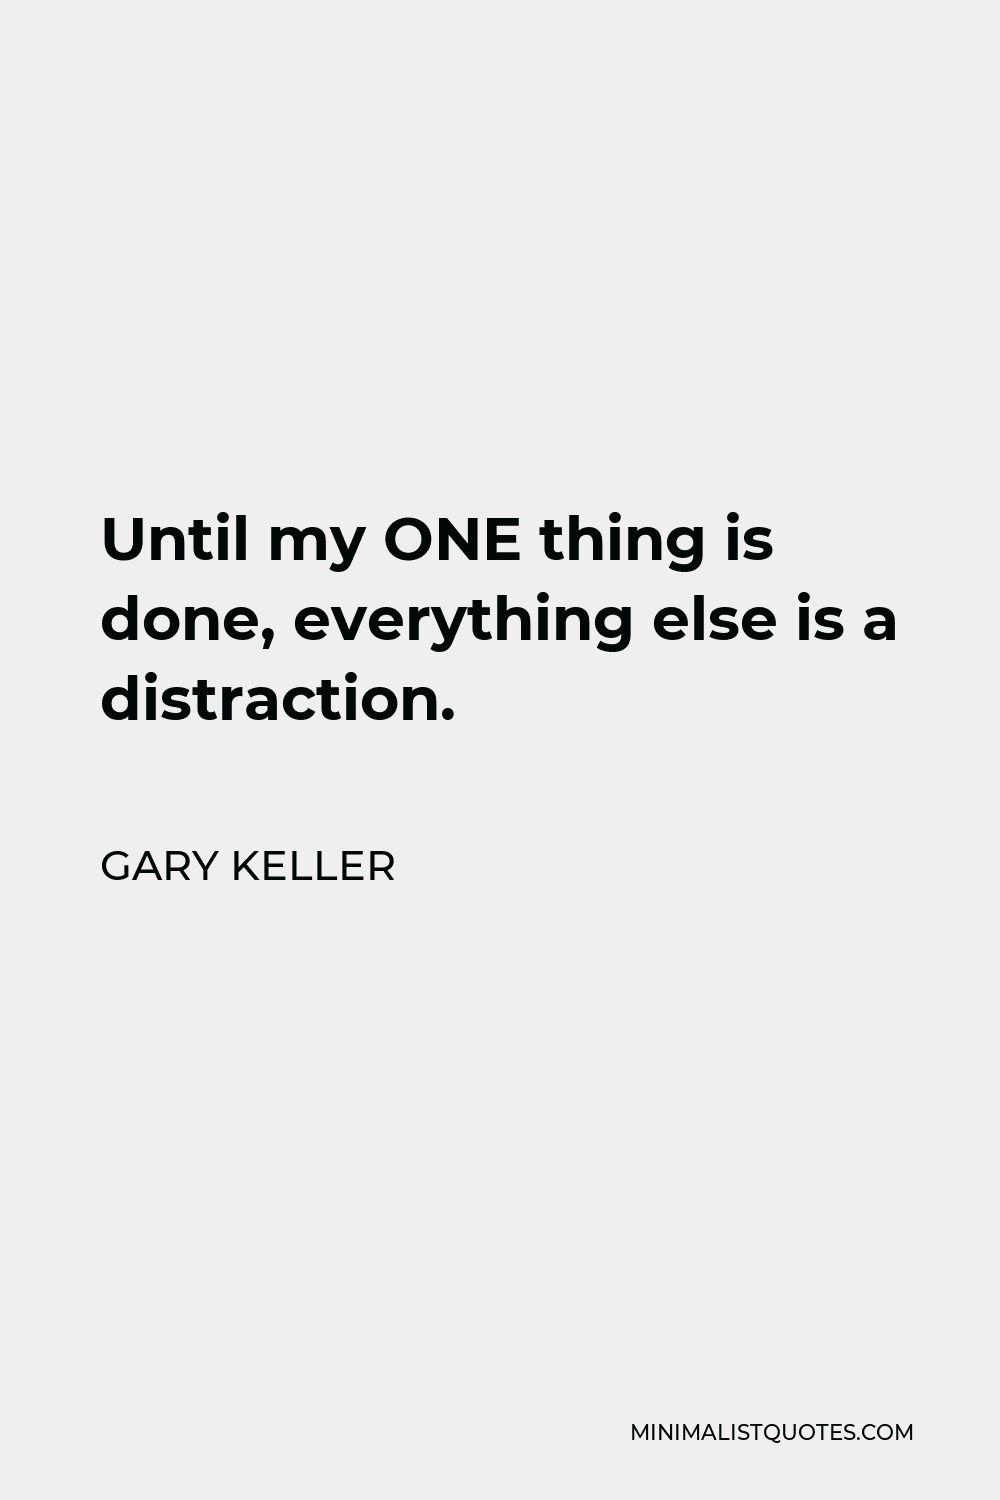 Gary Keller Quote - Until my ONE thing is done, everything else is a distraction.